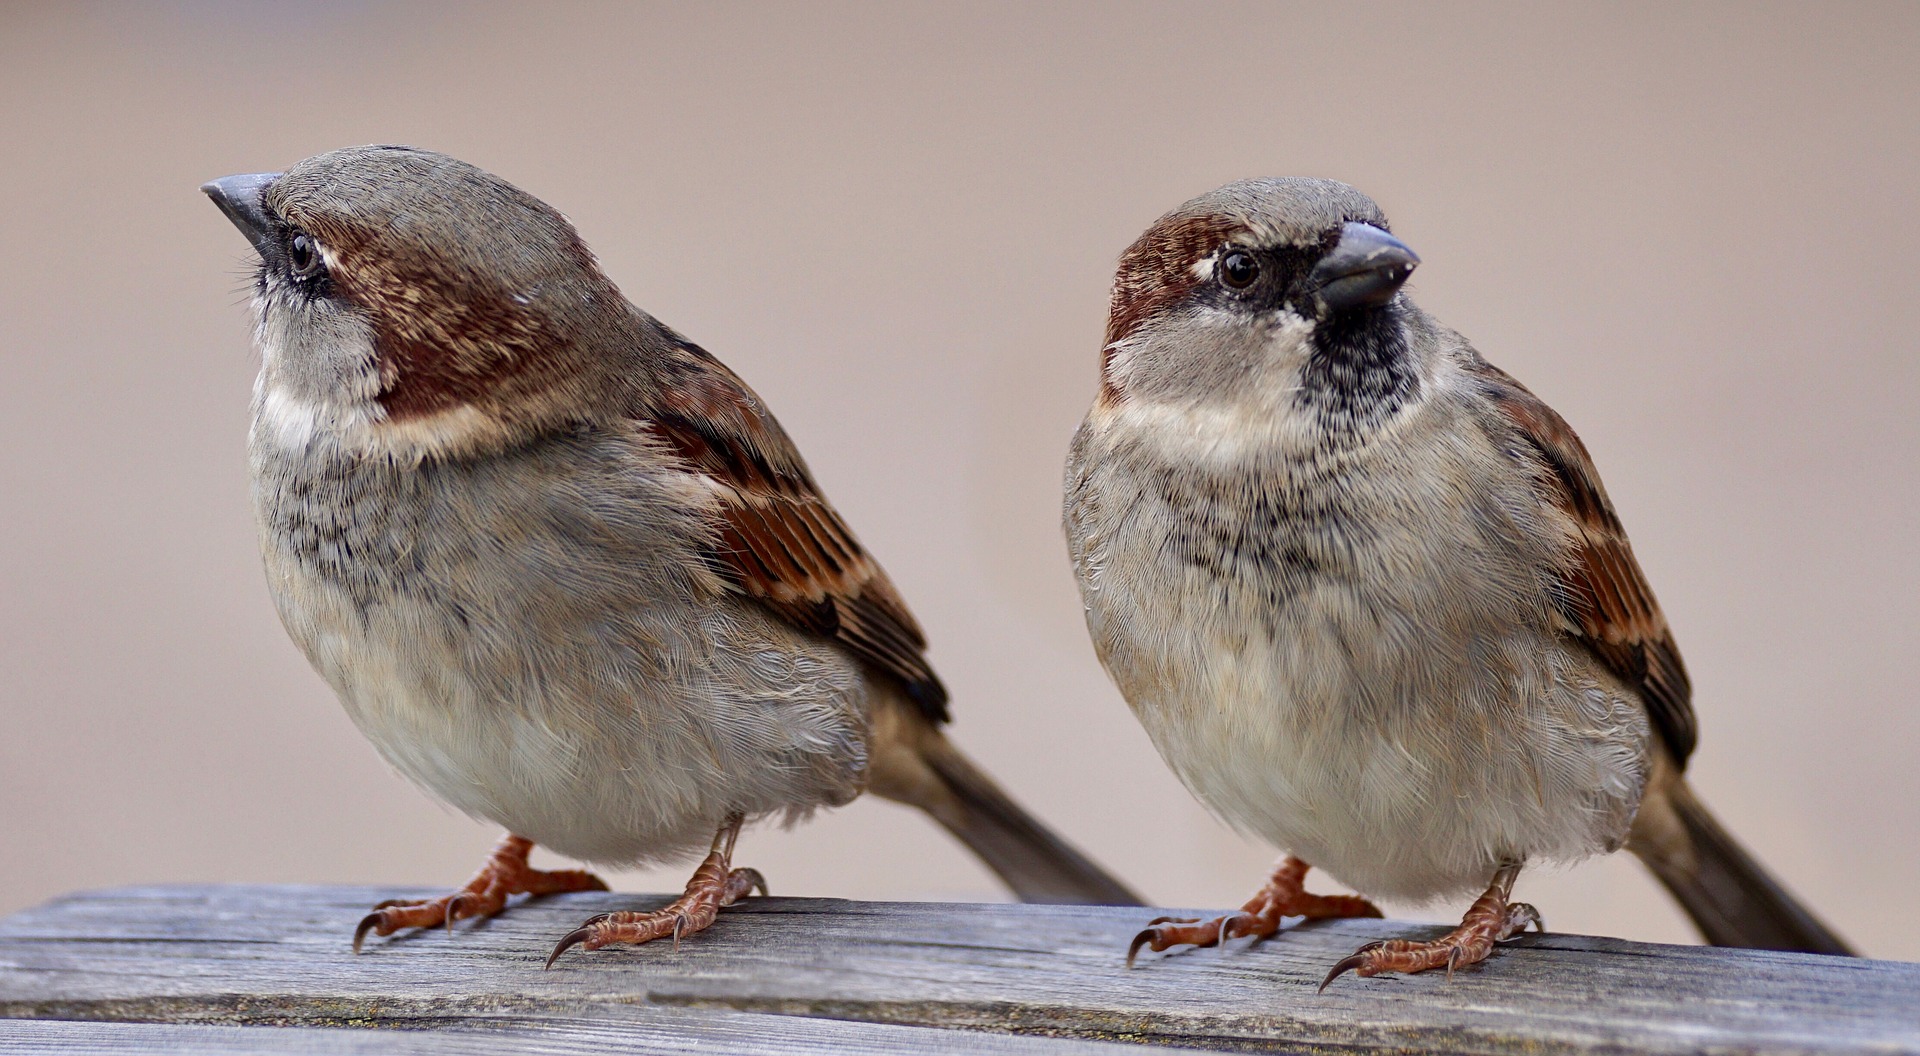 Two sparrows are sitting on wood and looking in different directions.